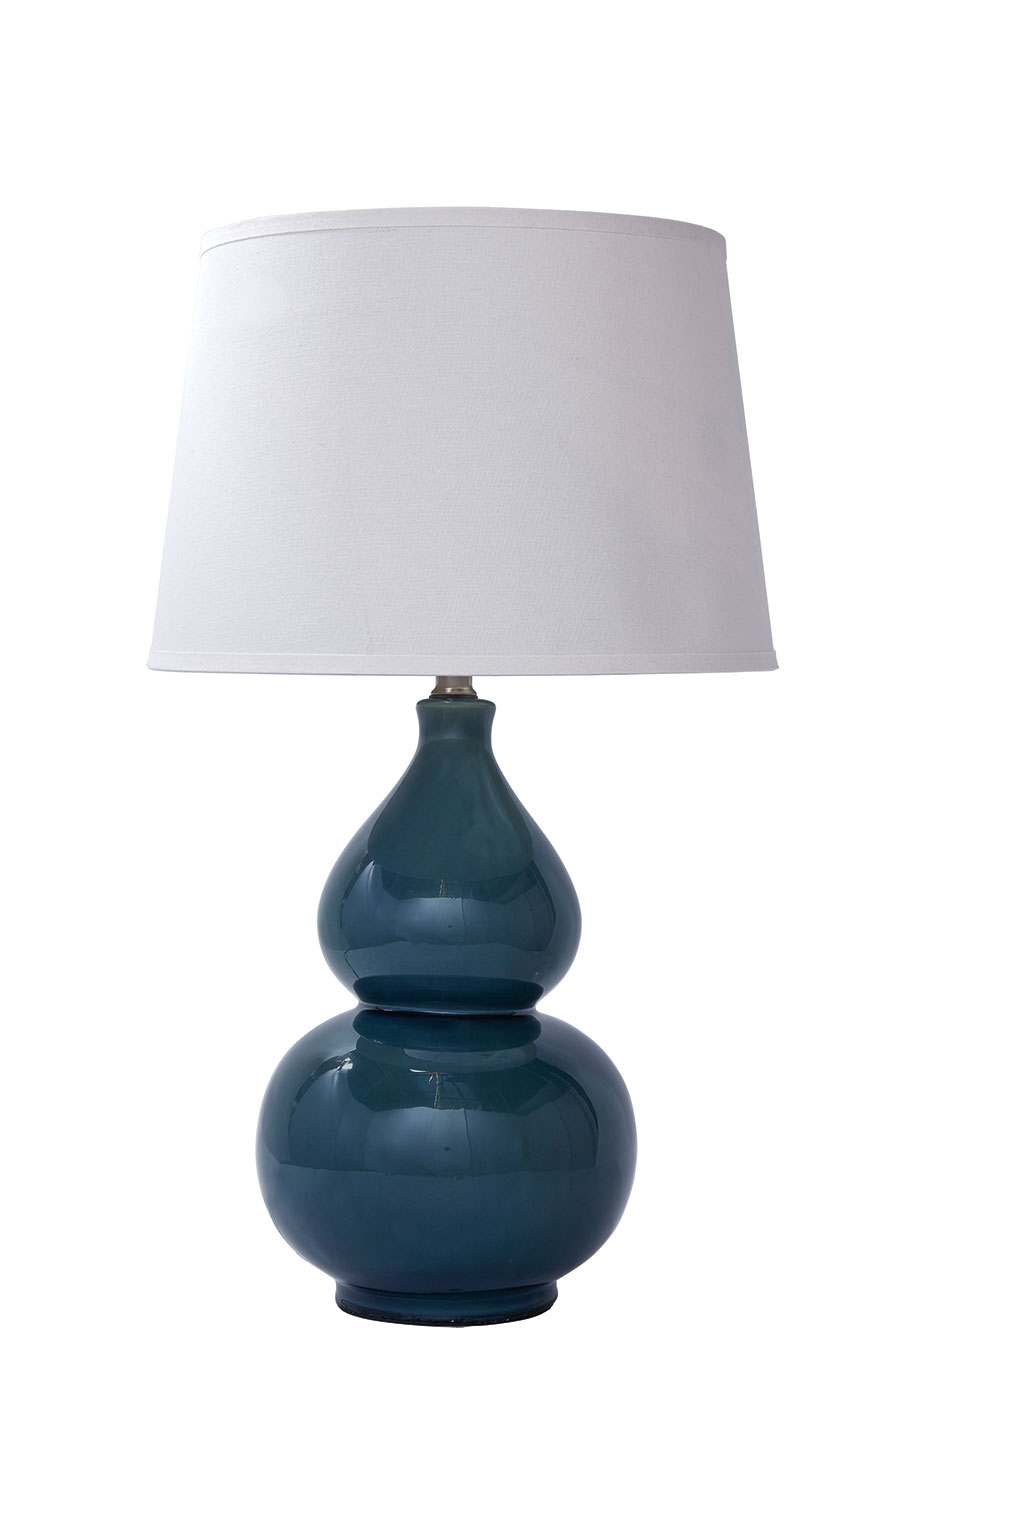 L100064 Table Lamp - Teal